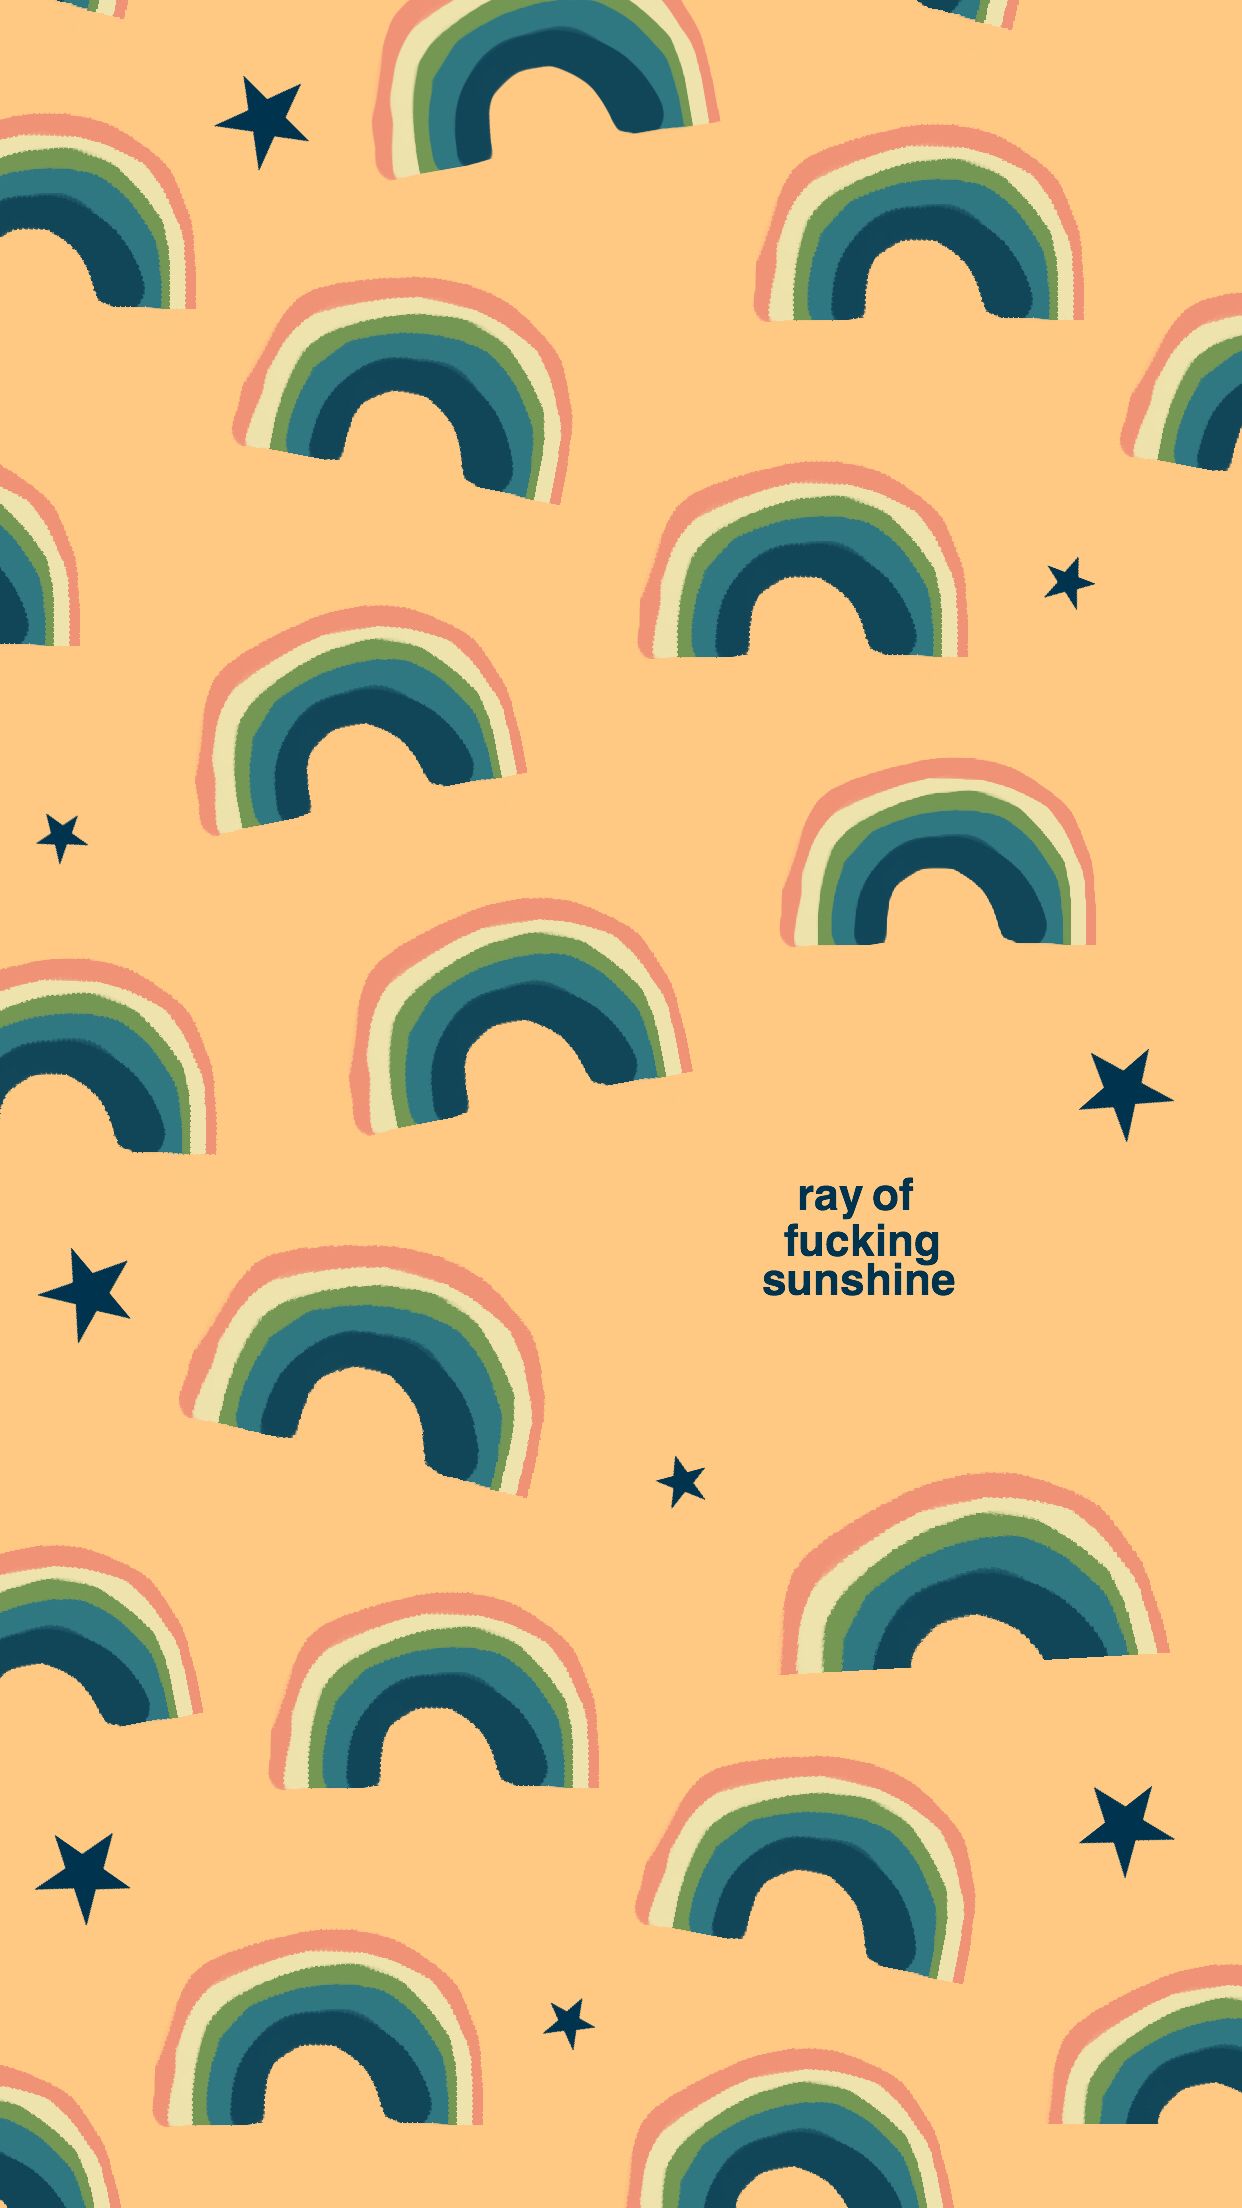 A phone background with rainbows and the words 